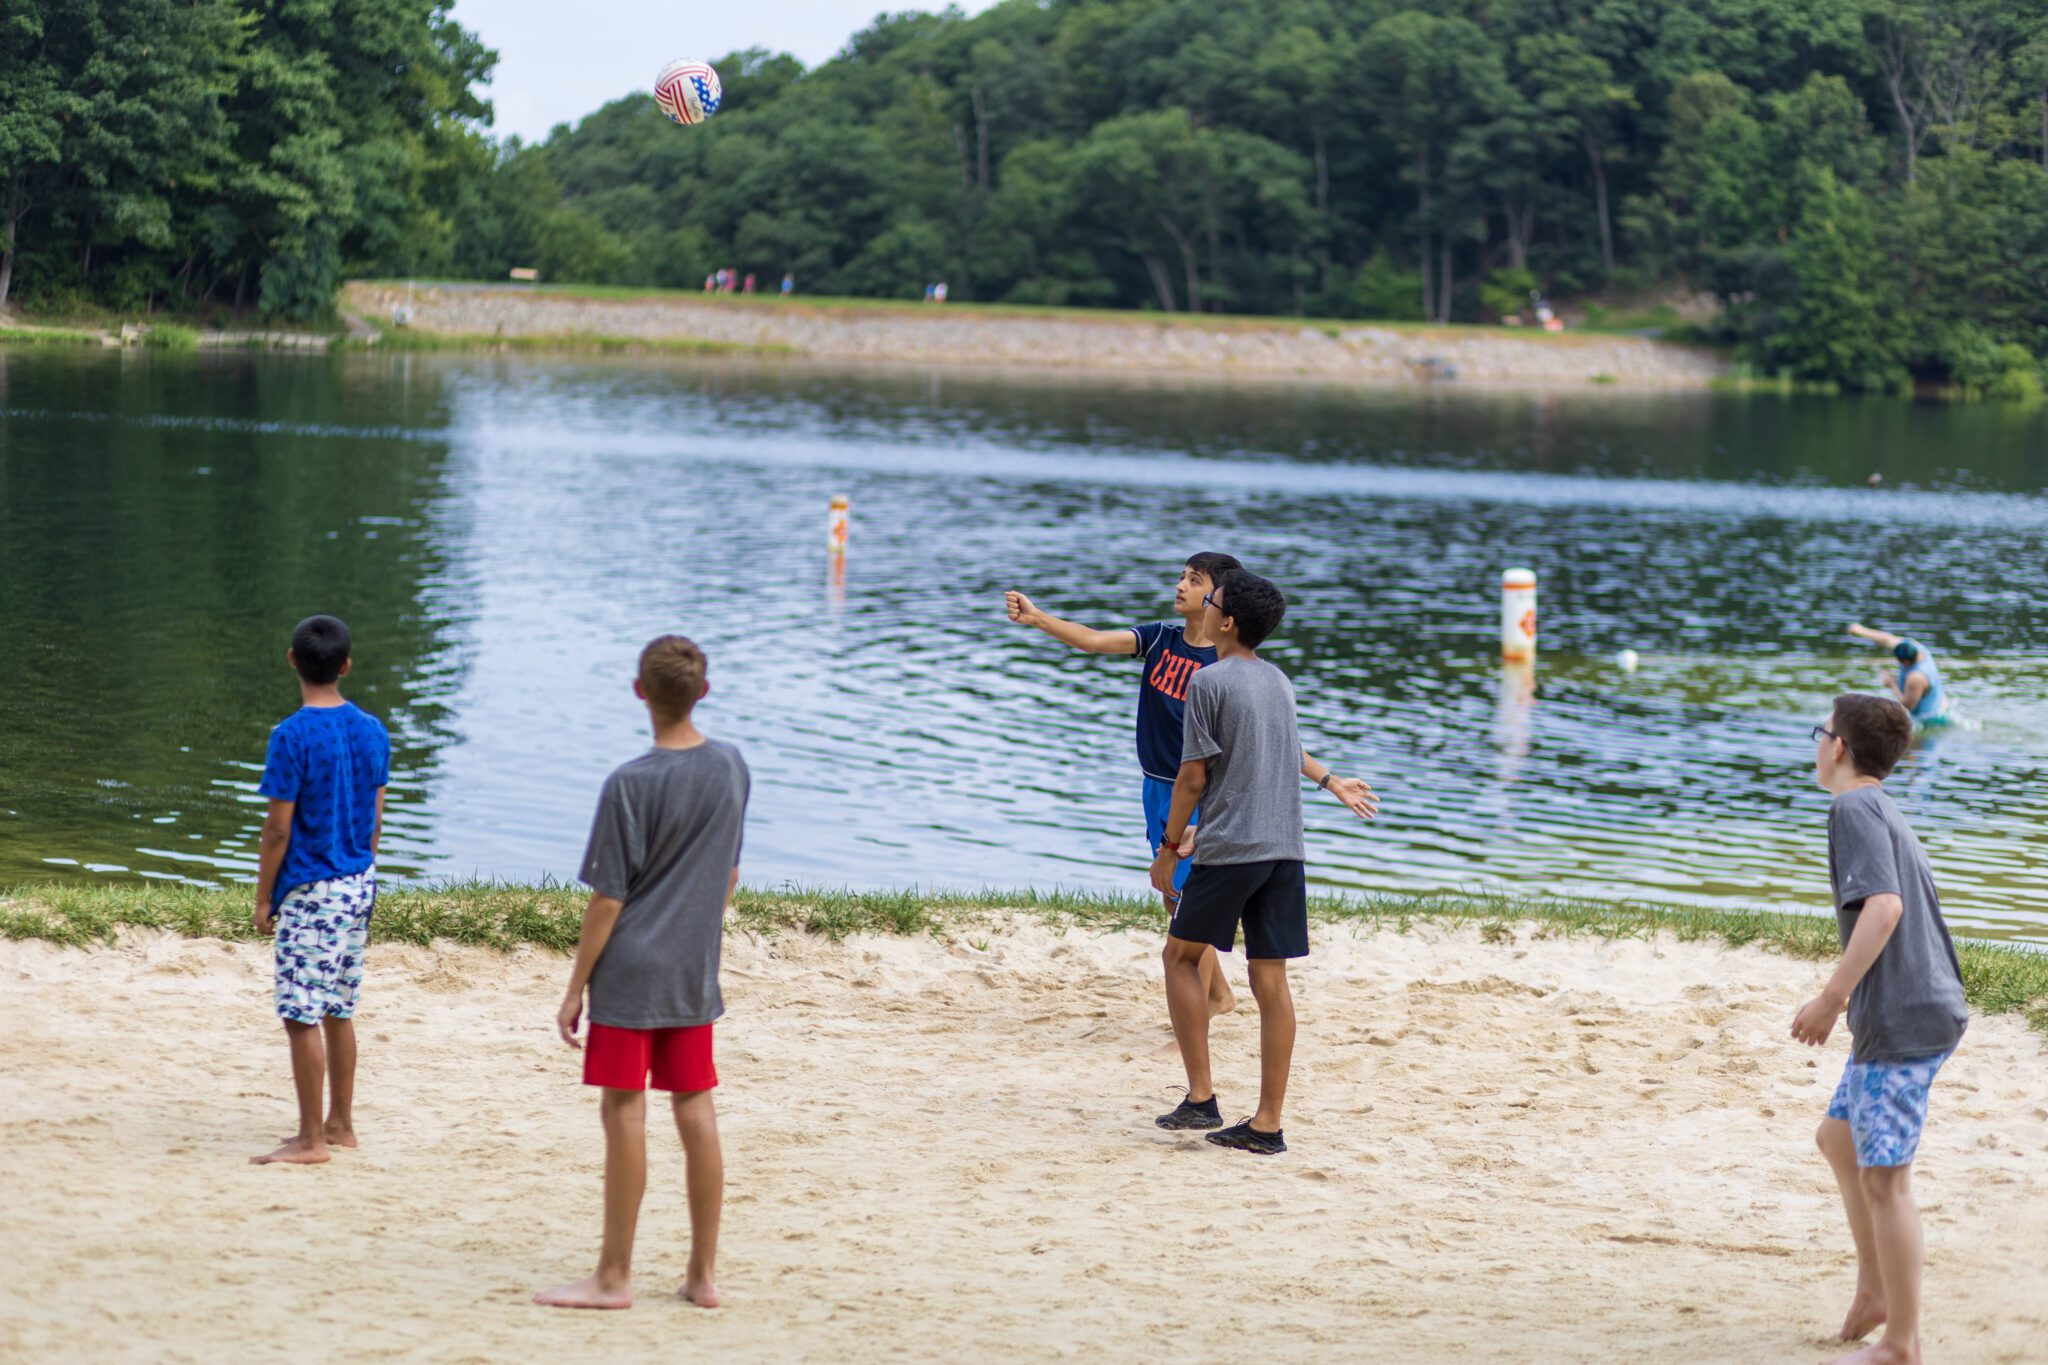 A group of boys participating in the P.L.E.D.G.E. Leadership Program playing a game of frisbee in the sand.